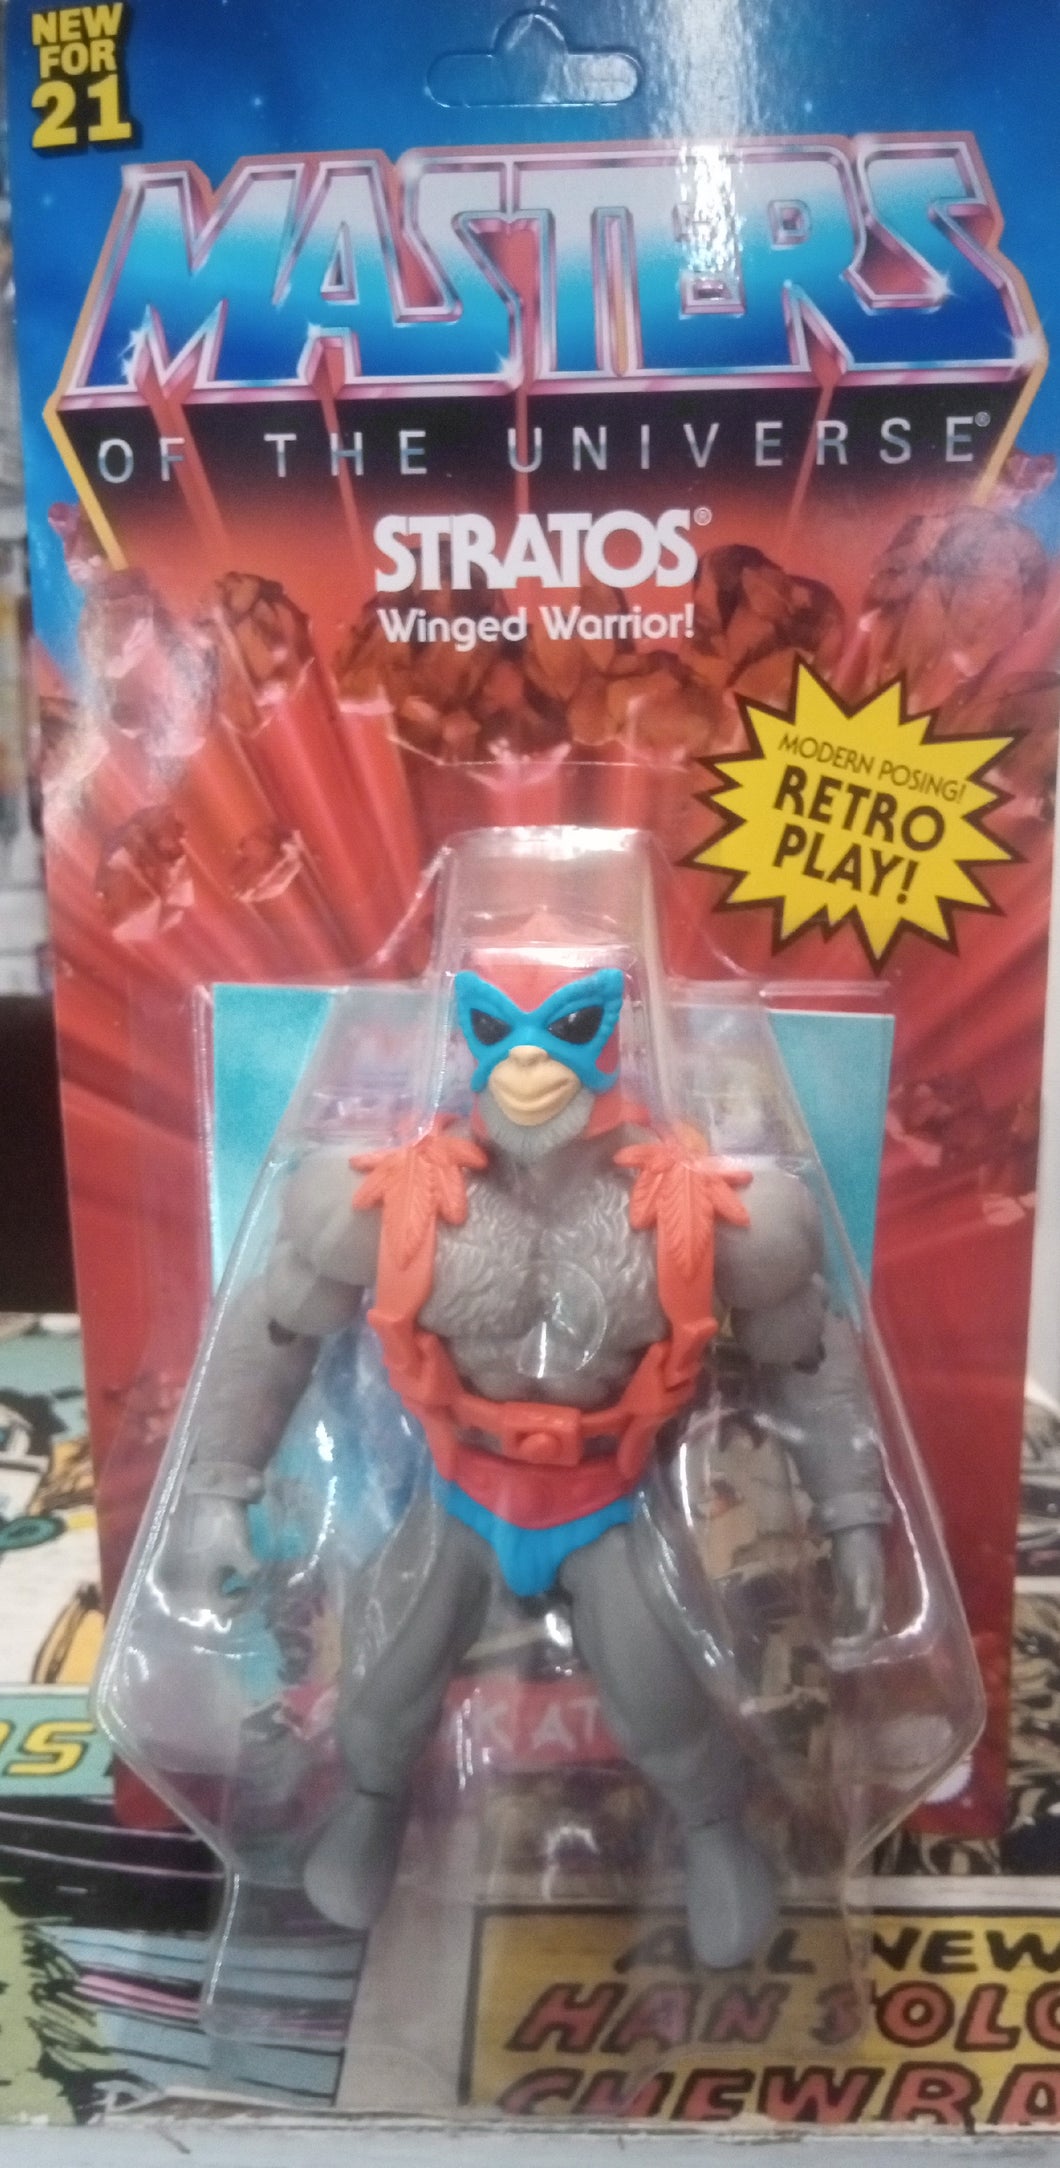 MASTERS OF THE UNIVERSE STRATOS FIGURE